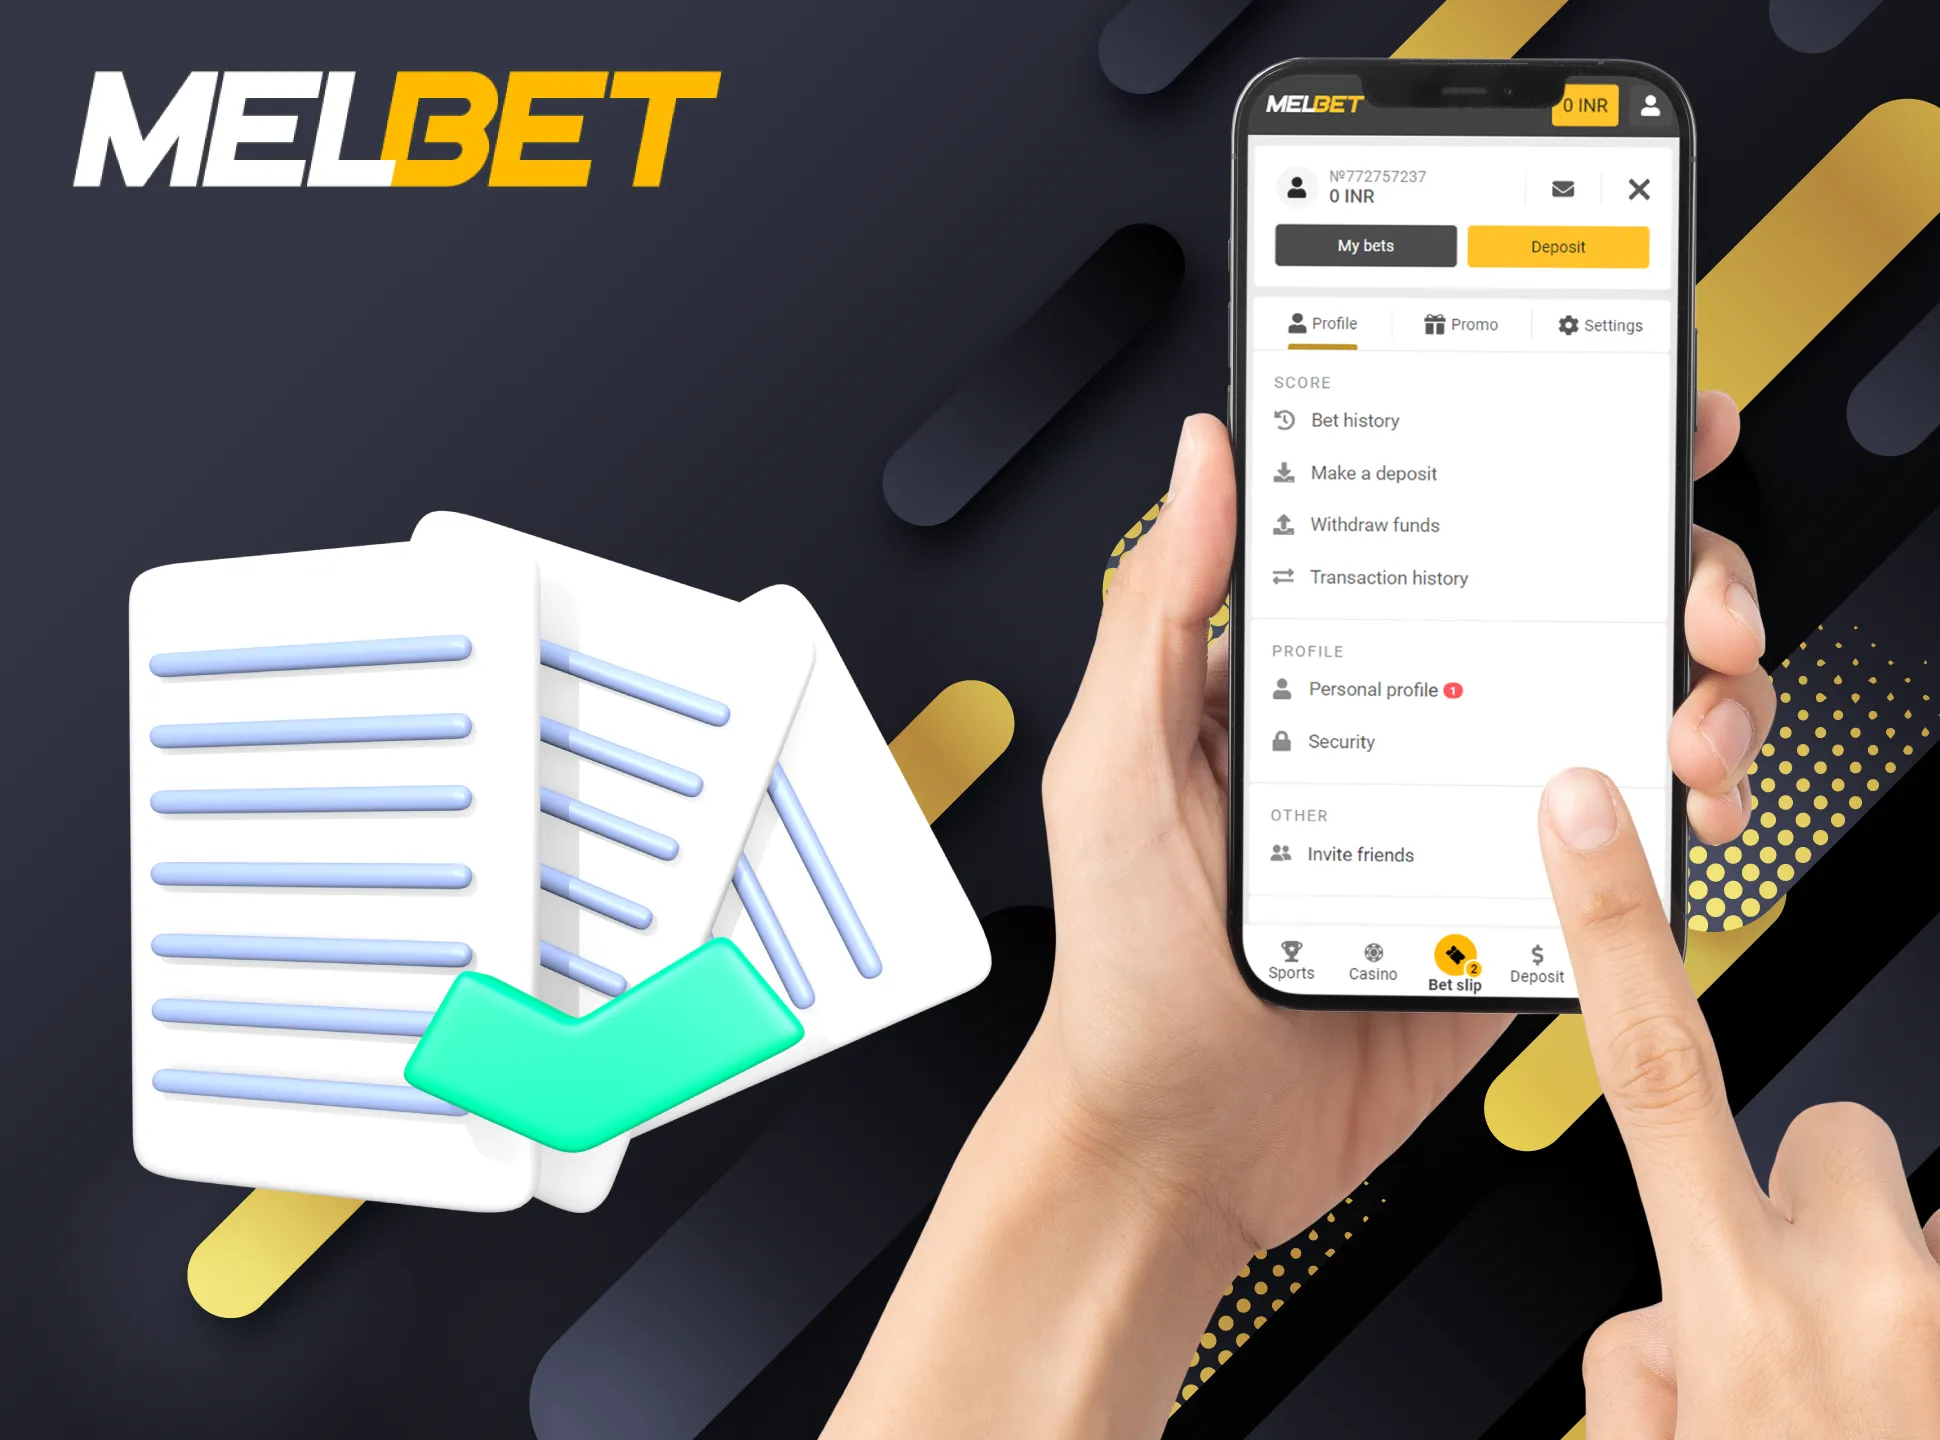 Follow our tips to win m ore from betting in the Melbet app.